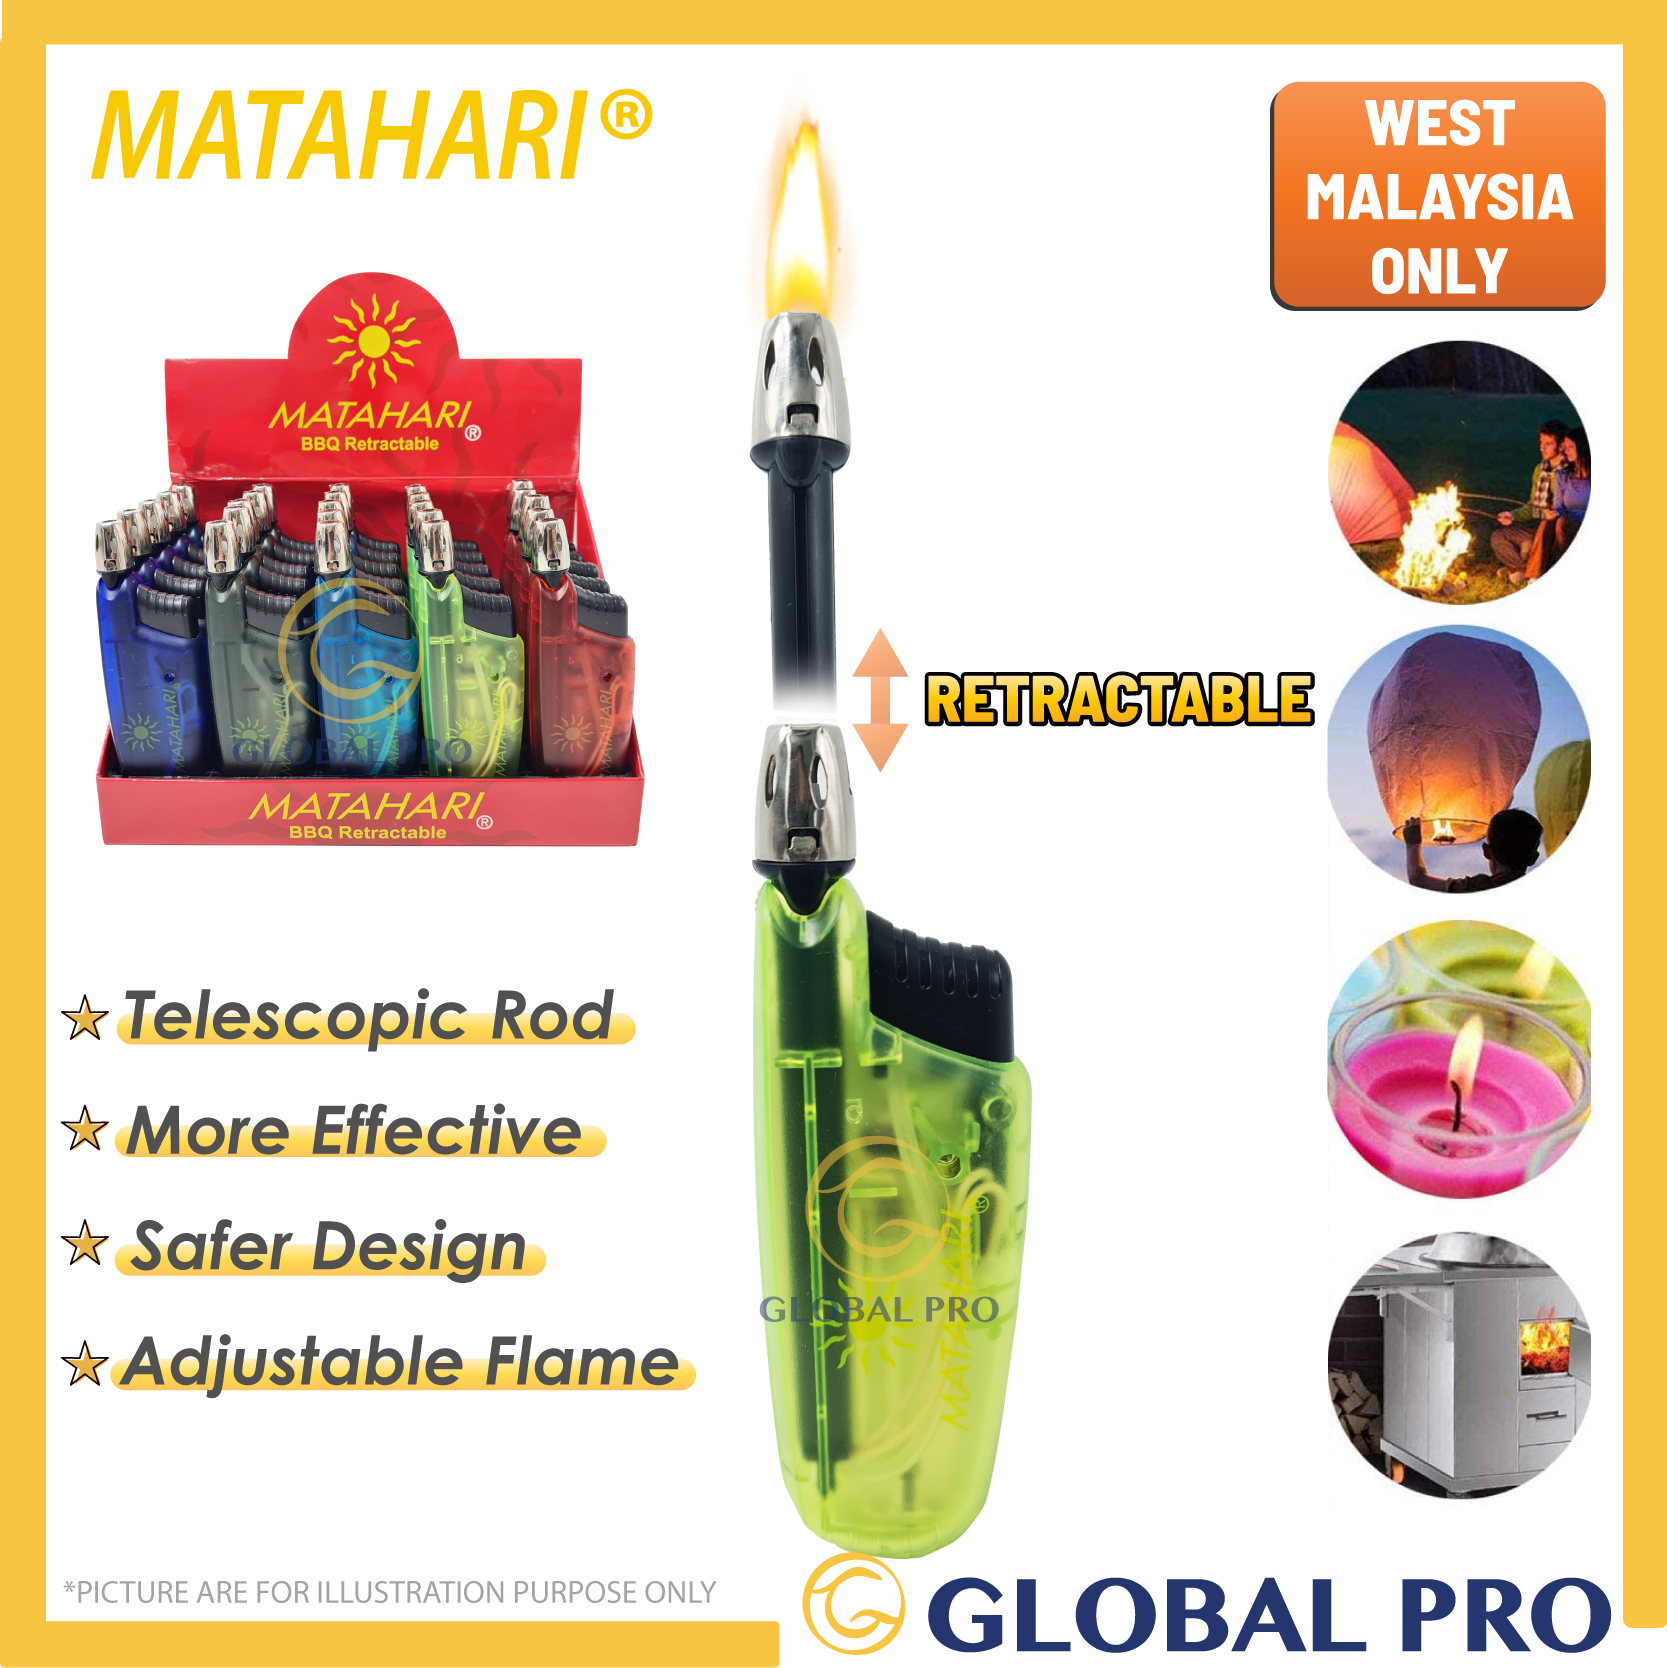 [1PC] Matahari RETRACTABLE GAS LIGHTER Refillable Electronic lighter Candle light for BBQ Camping Cooking P2064-J20